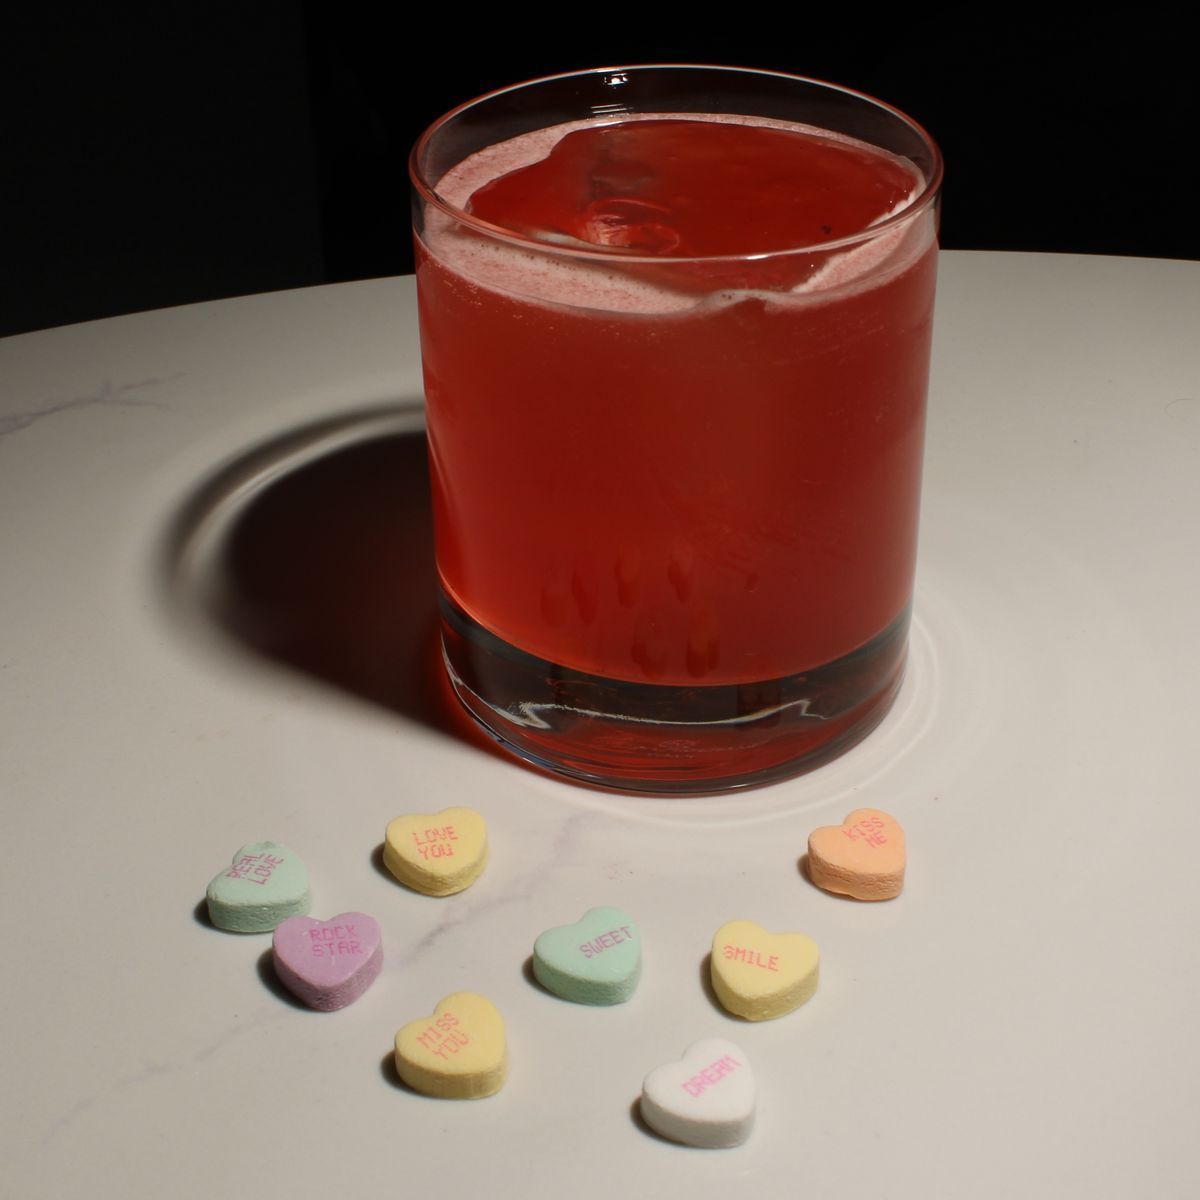 This is a Valentine's Day cocktail that encompasses everything about love, sweet, bitter, sexy and incredibly potent! This cocktail is named after the song of the same name by Dancehall artist Vybz Kartel. 